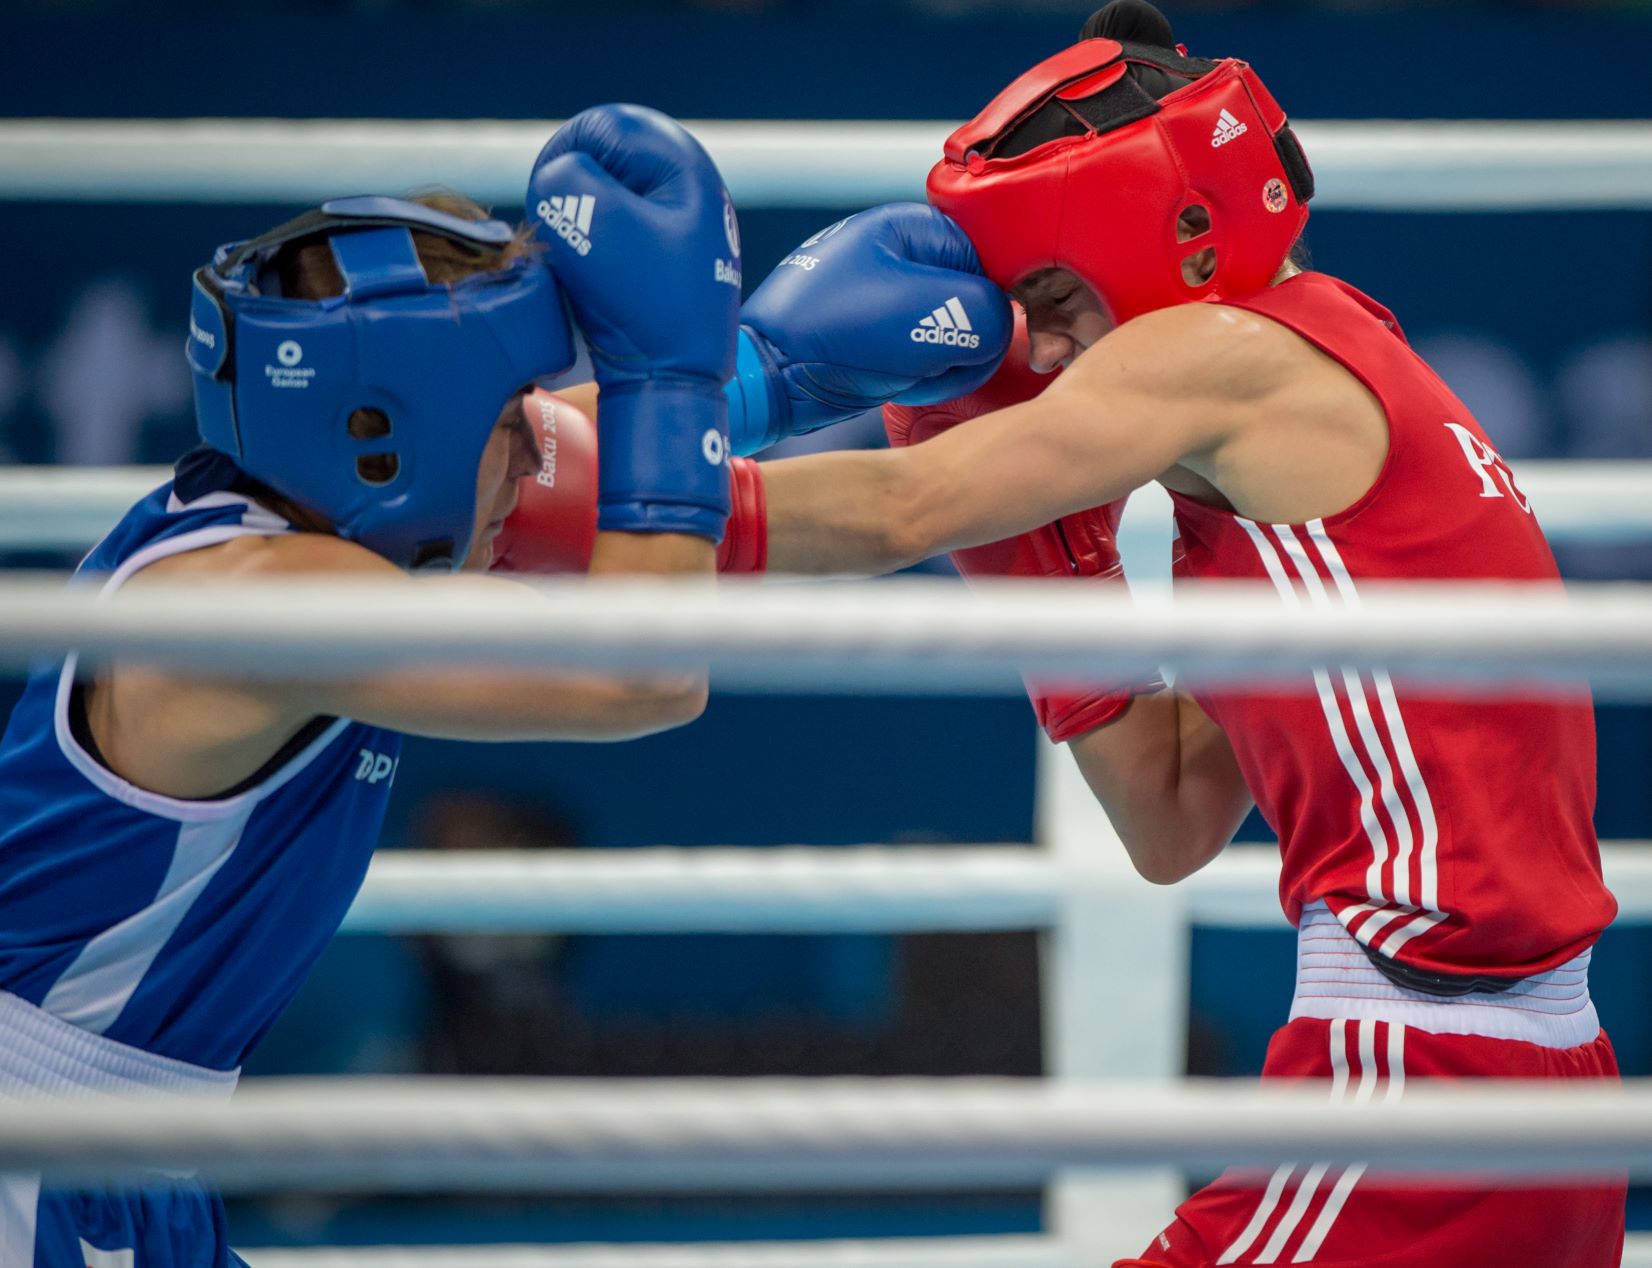 Polish boxers are looking forward to the European Games. “We want to show our strength”